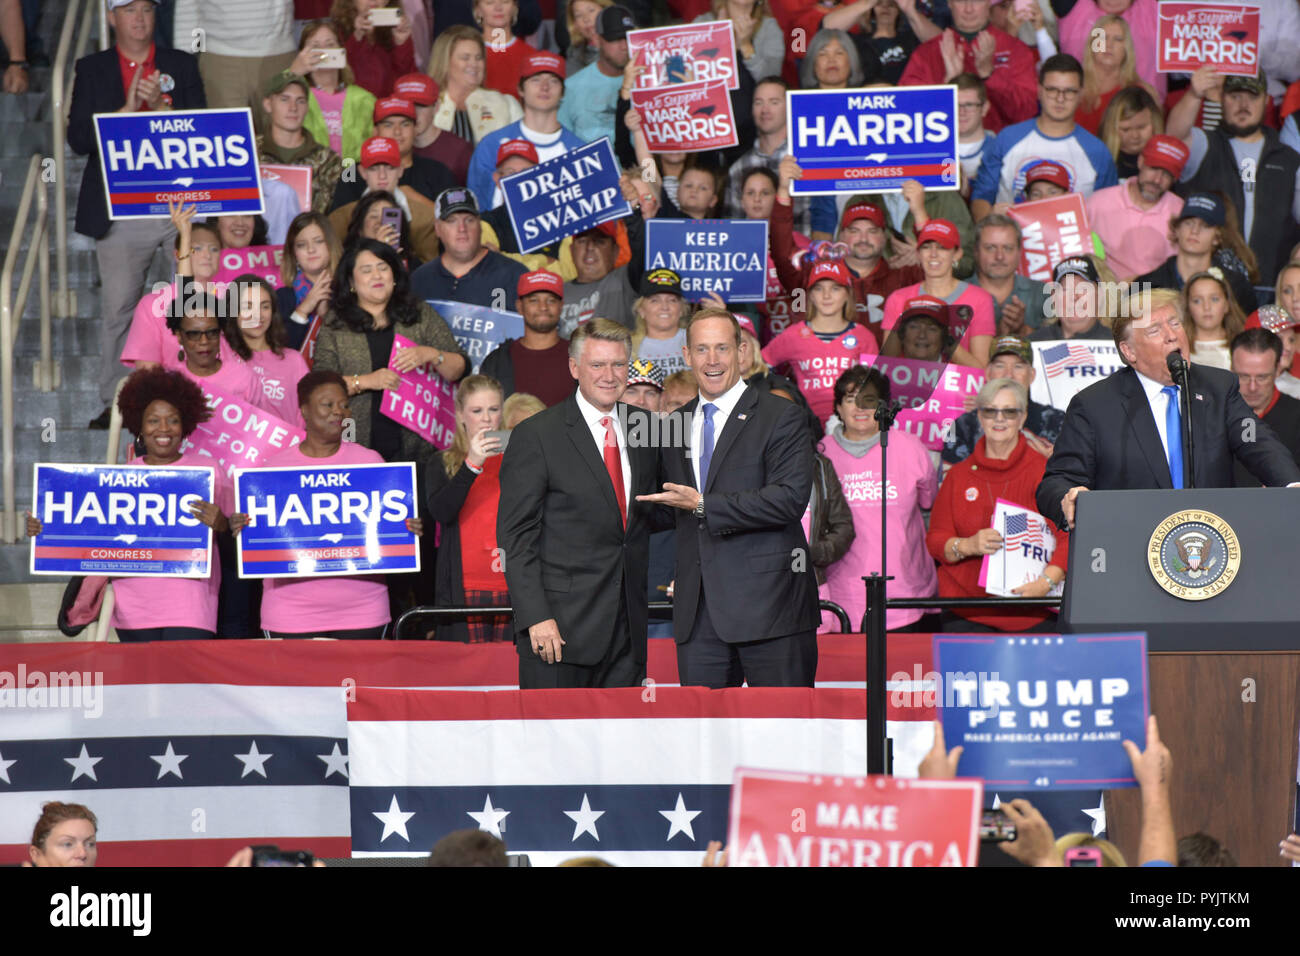 Charlotte, NC, USA. 26 Oct 2018. US President Trump attends a MAGA Rally to campaign for 9th District House Candidate, Mark Harris. Trump's supporters braved cold weather and hard rain, some arriving over a day early, to hear the president speak.  Photo Credit: Castle Light Images / Alamy Live News Stock Photo